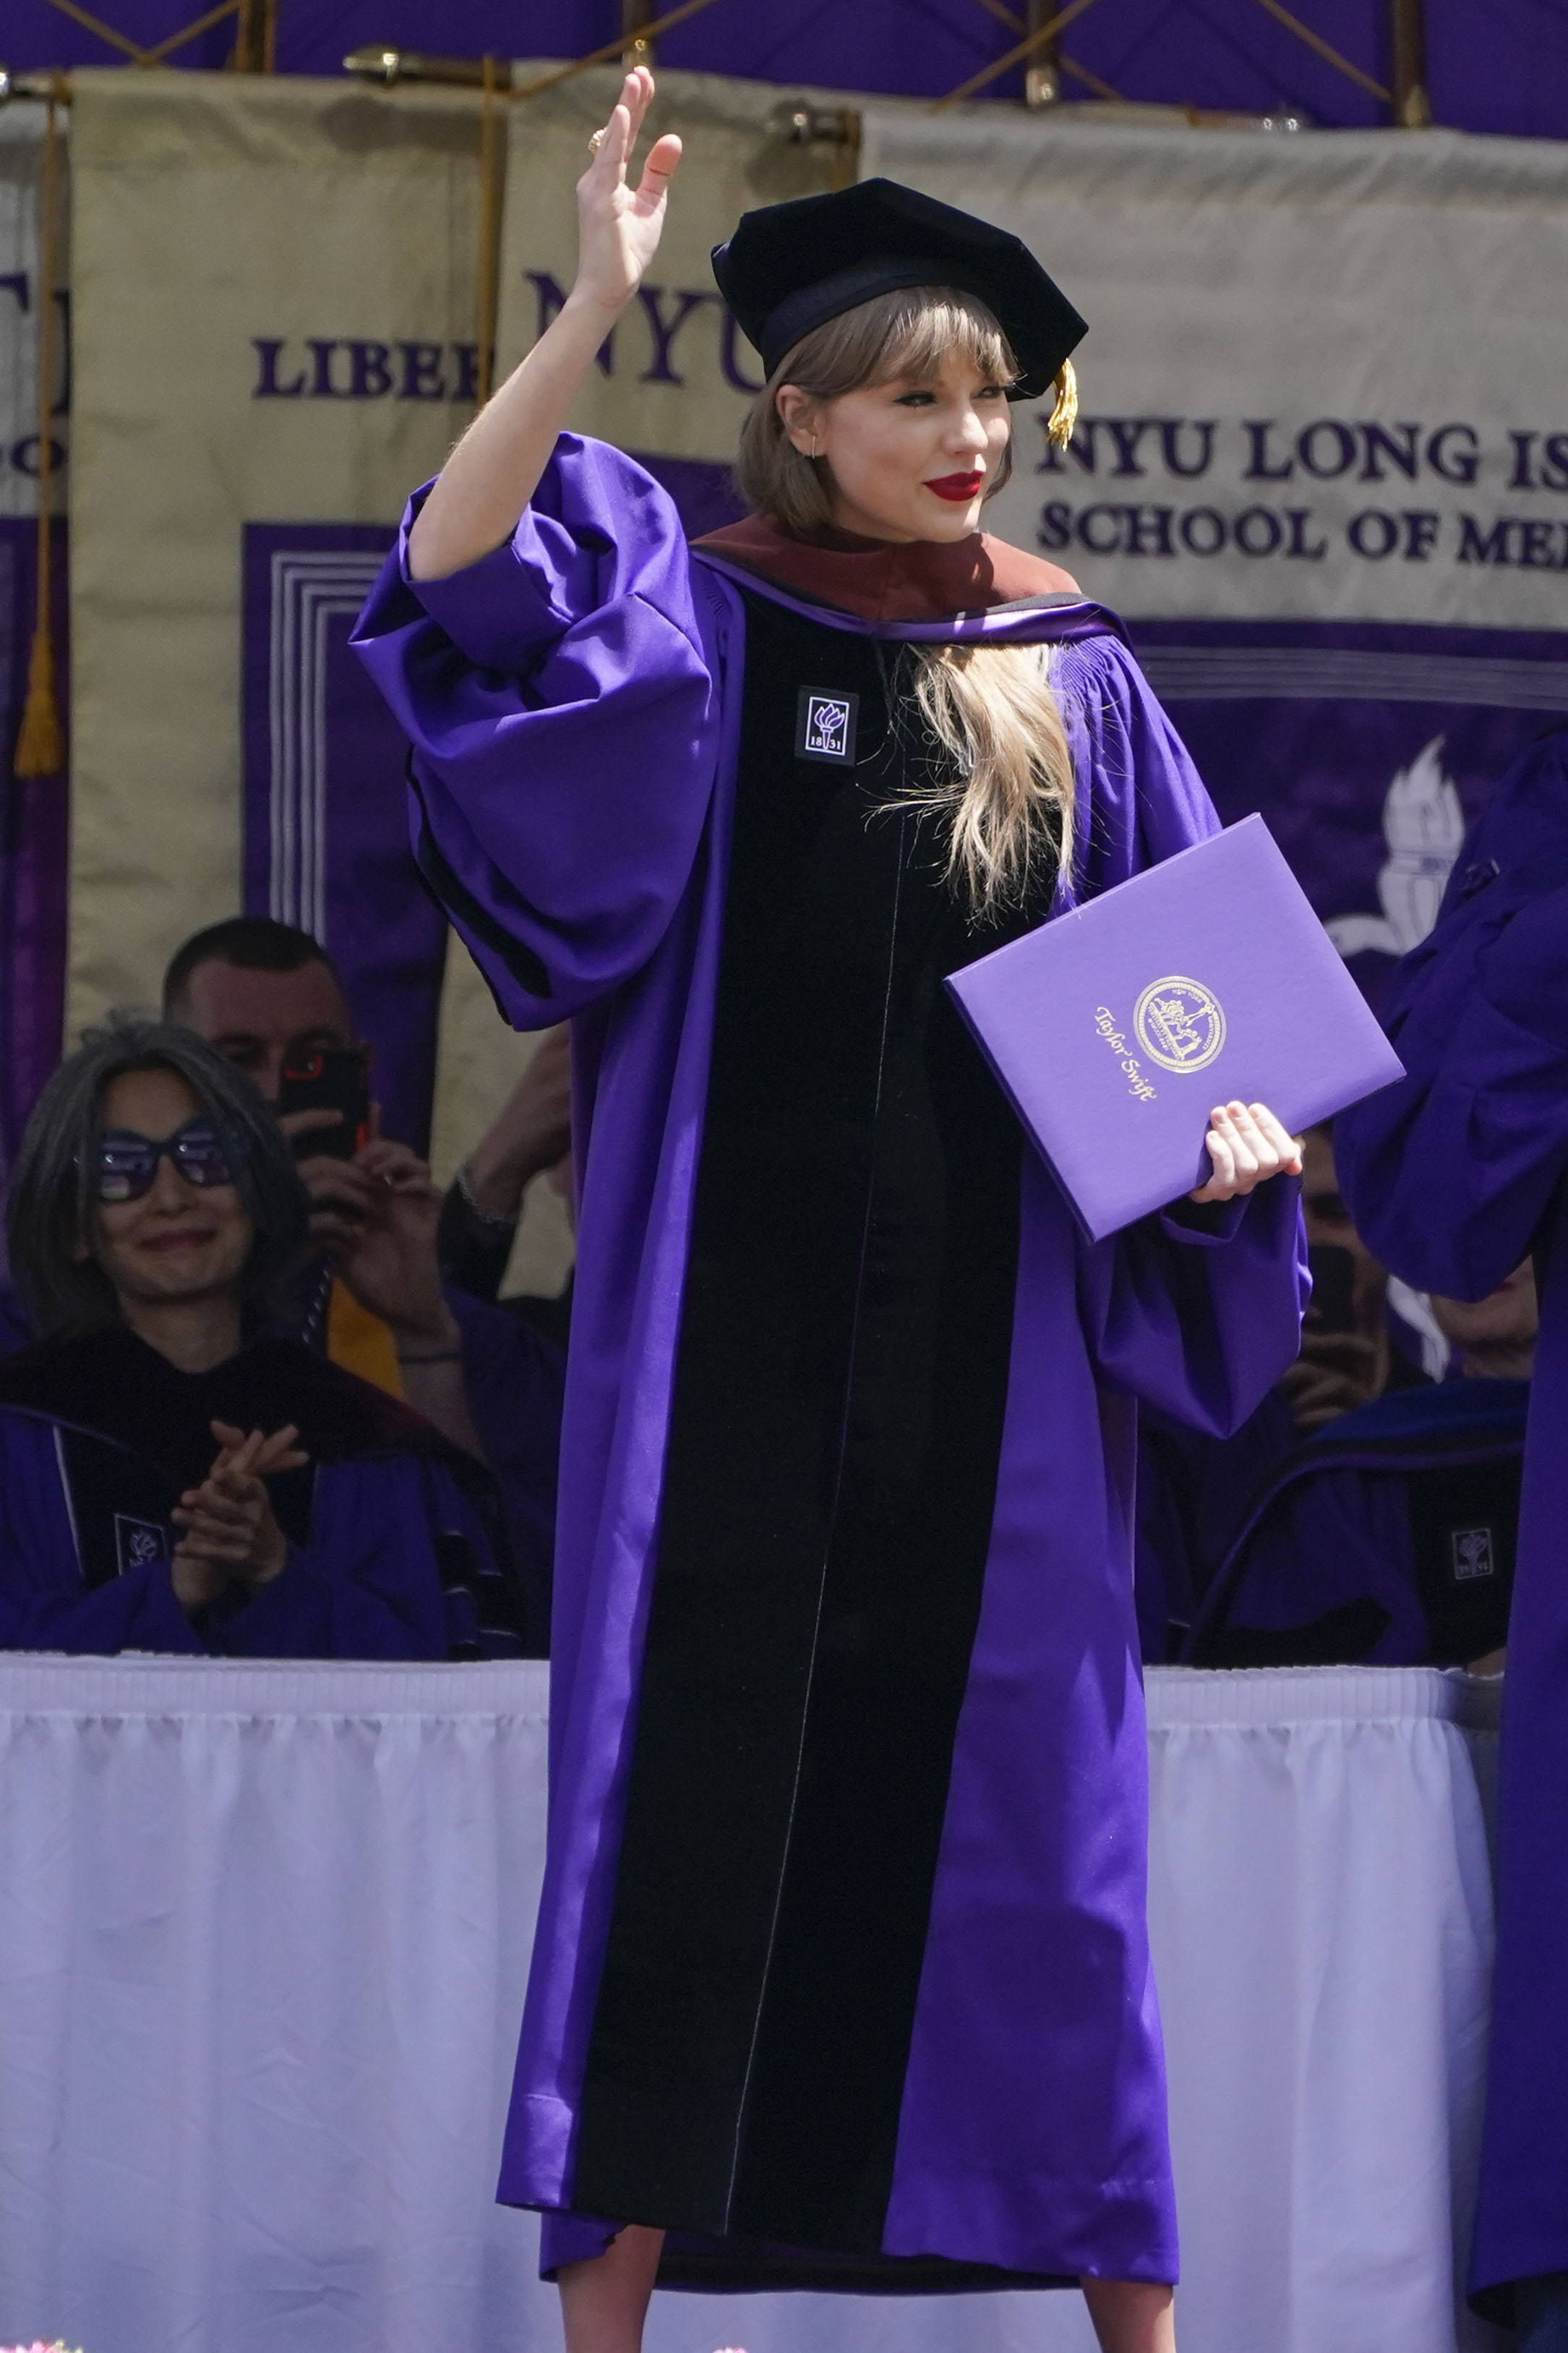 Taylor Swift Degree, College, Doctorate: Her Education Details 